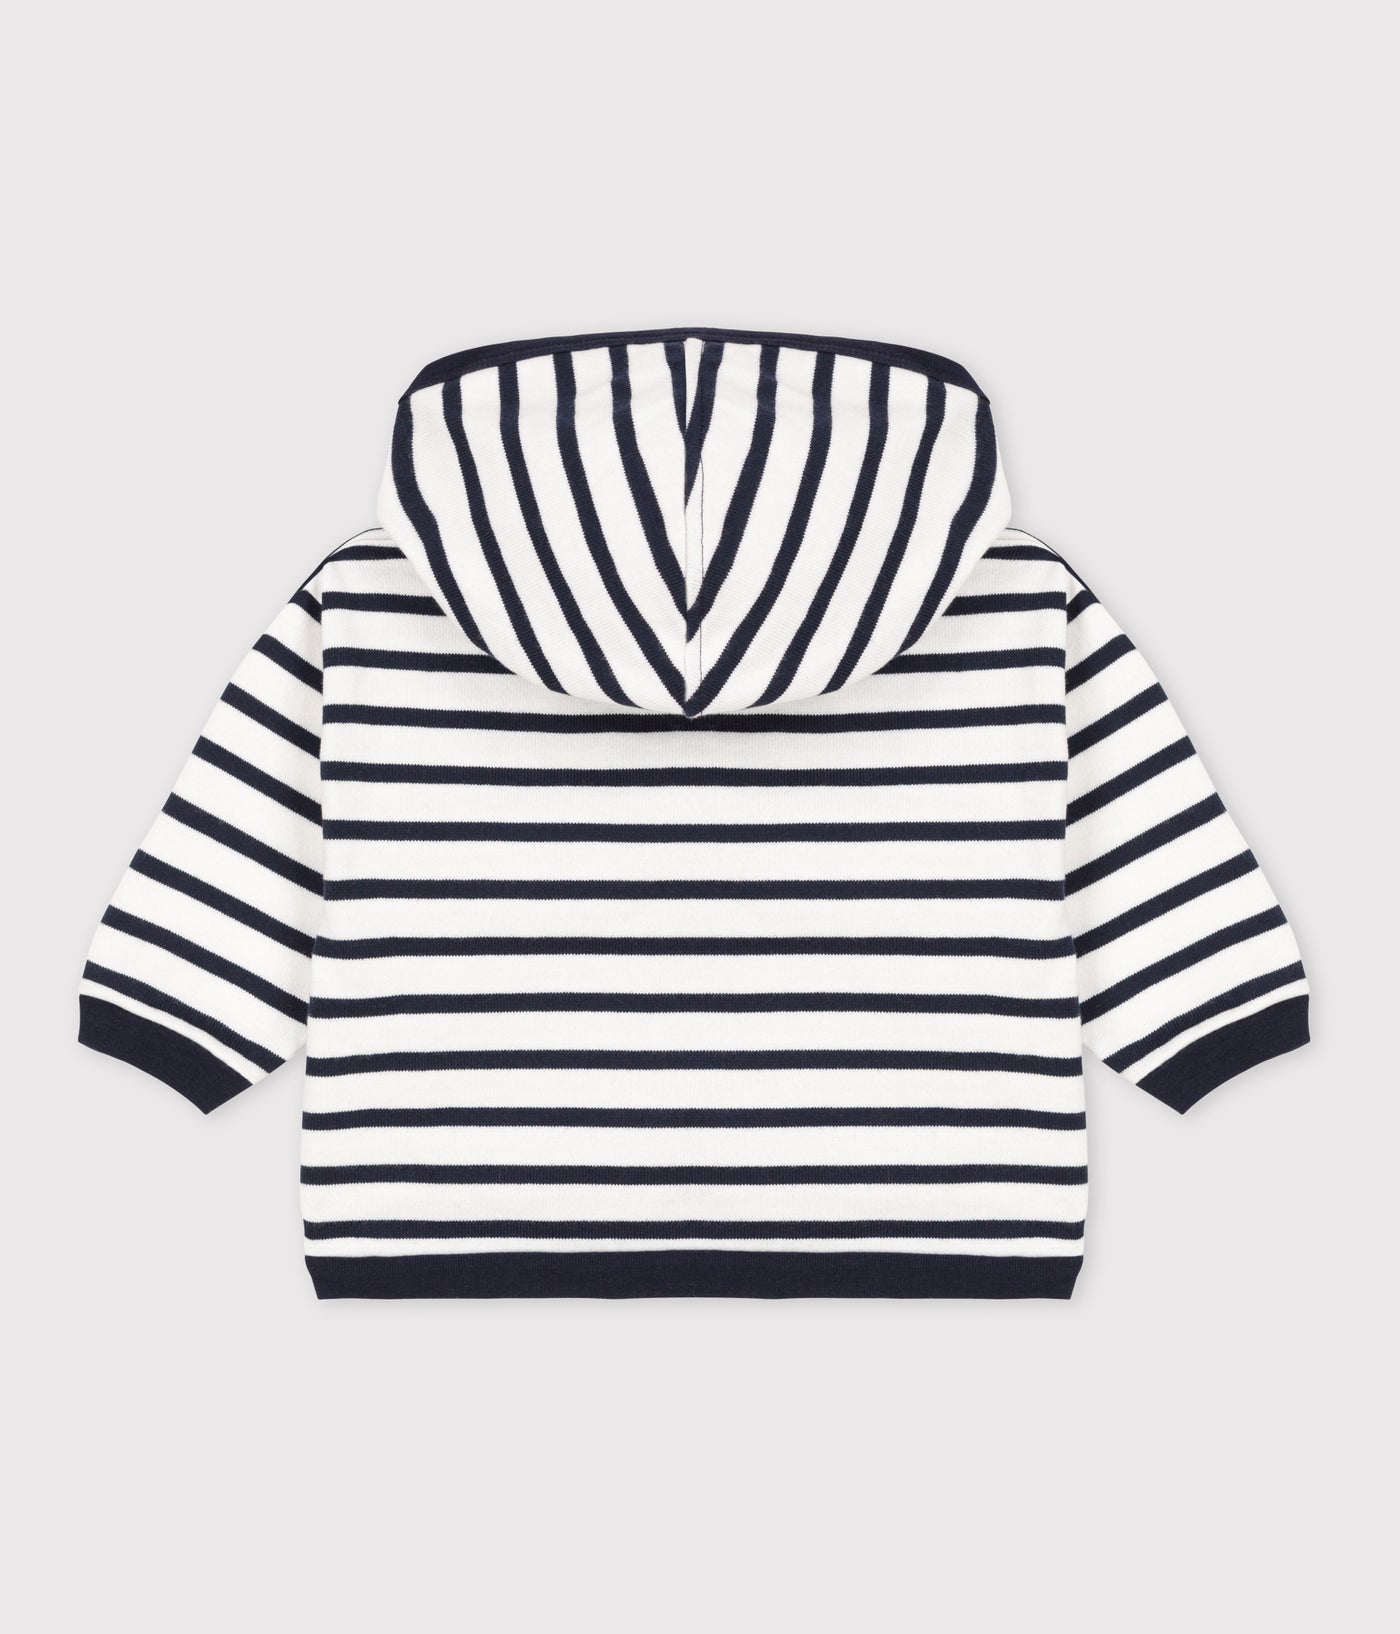 Petit Bateau SWEATSHIRT MADE OF THICK JERSEY THAT'S SOFT AND COMFY FOR BABY TO WEAR.<br>Features the brand's iconic sailor stripes.<br>Has a hood for an on-trend sportswear look.<br>Handy zip for getting baby dressed.<br>Made from organic cotton guaranteed as being grown using eco-friendly techniques and free from GMOs.<br>Petit Bateau is reducing its environmental impact through this cotton.